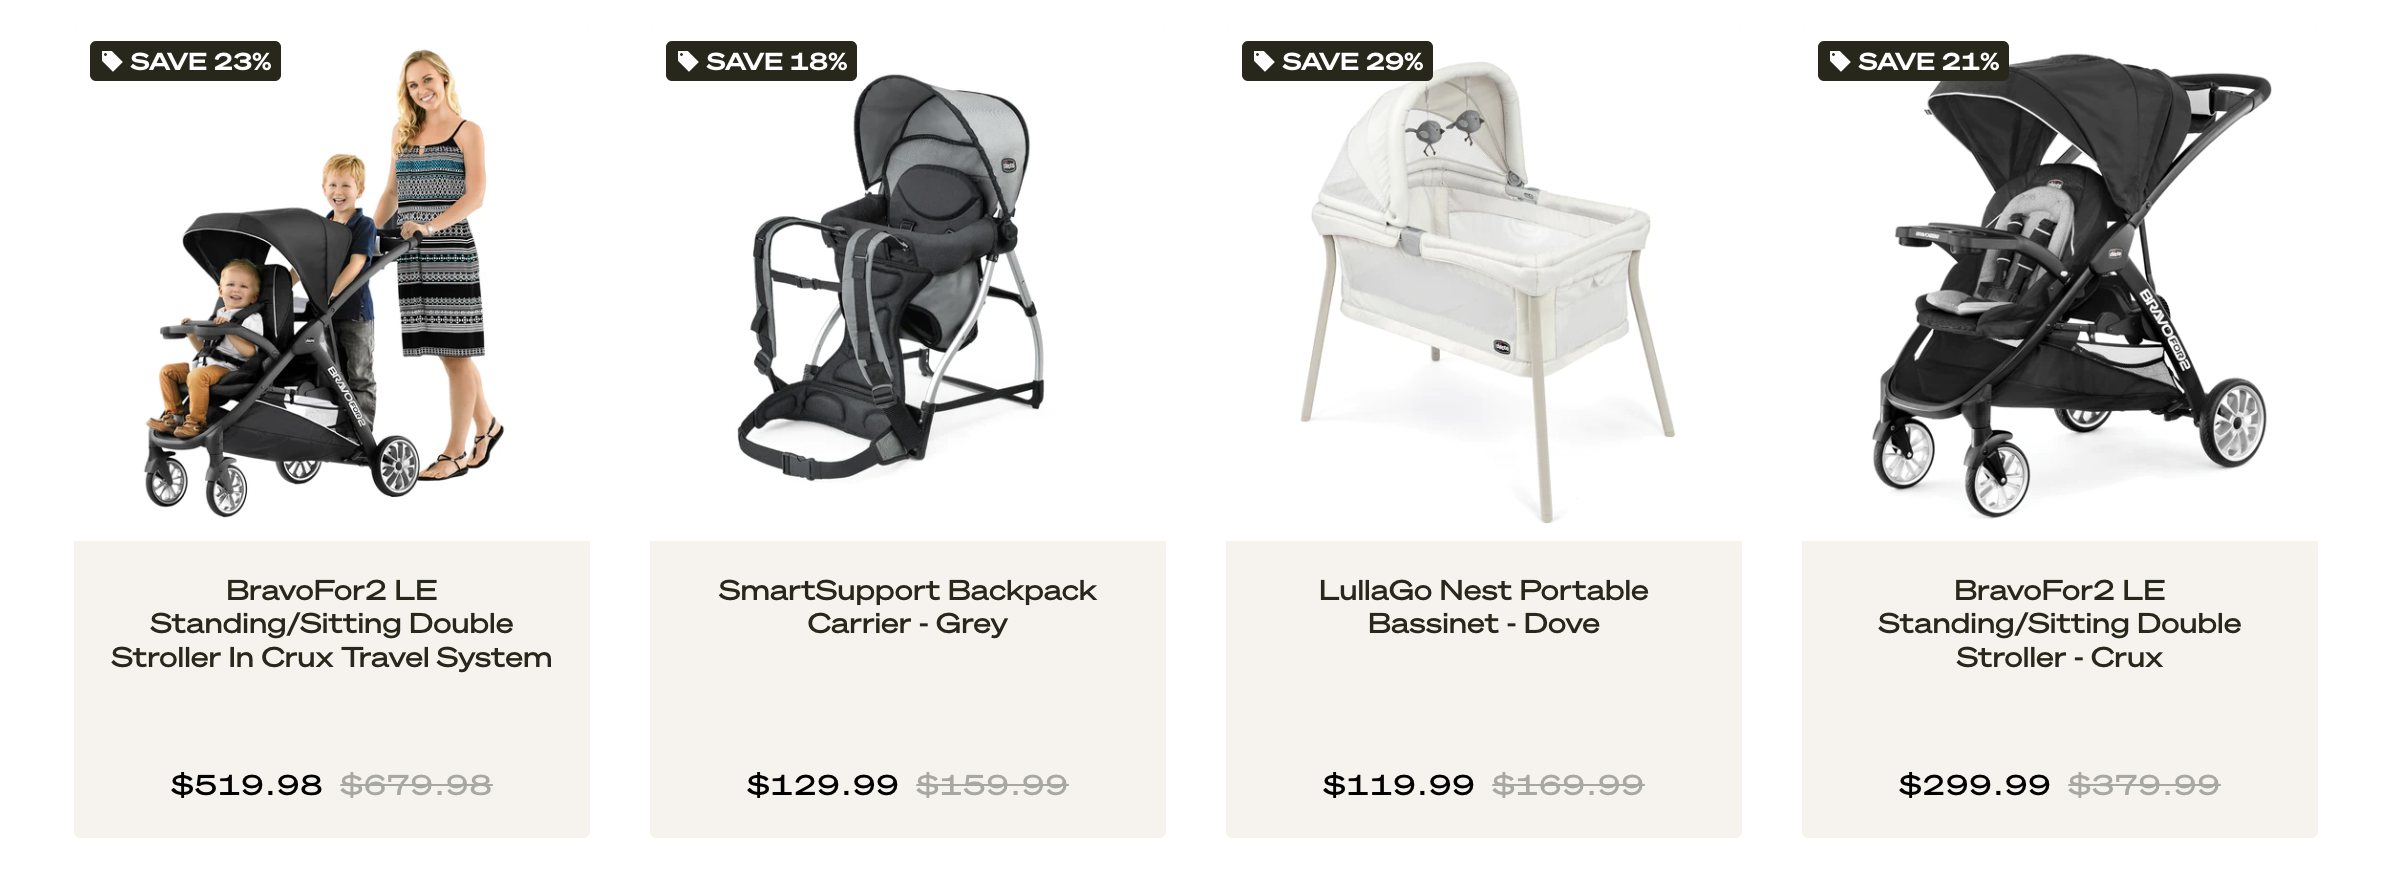 Home | Get the Hottest Deals and Best Prices on Baby Gear and More by Shopping With Mamas Uncut